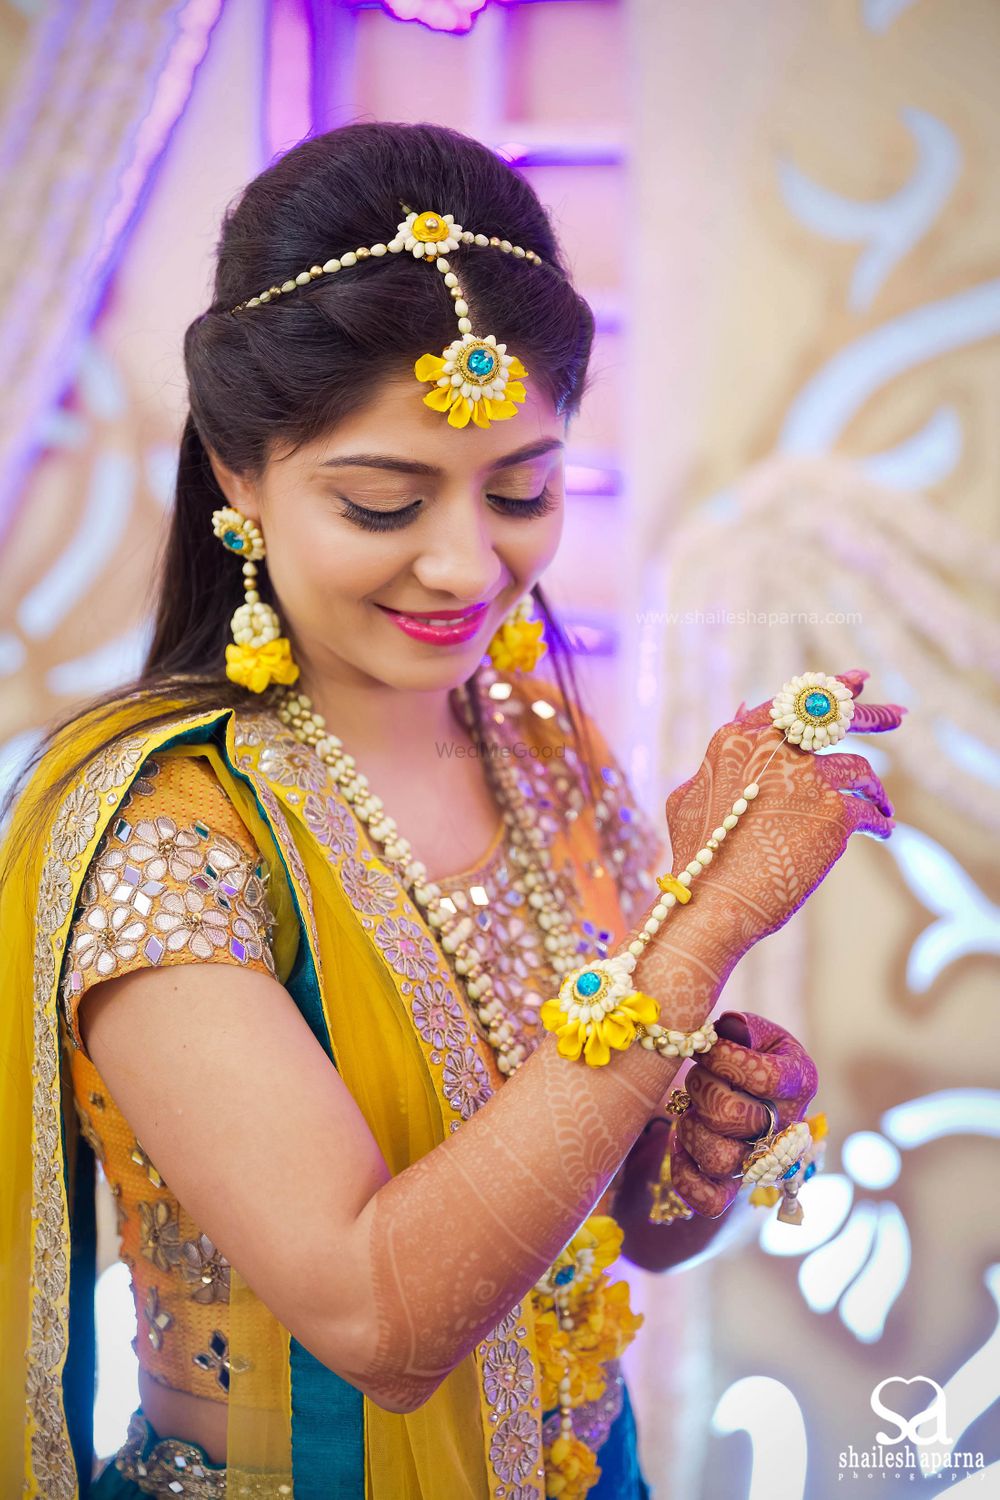 Photo of Yellow and Blue Floral Jewellery for Haldi and Mehendi